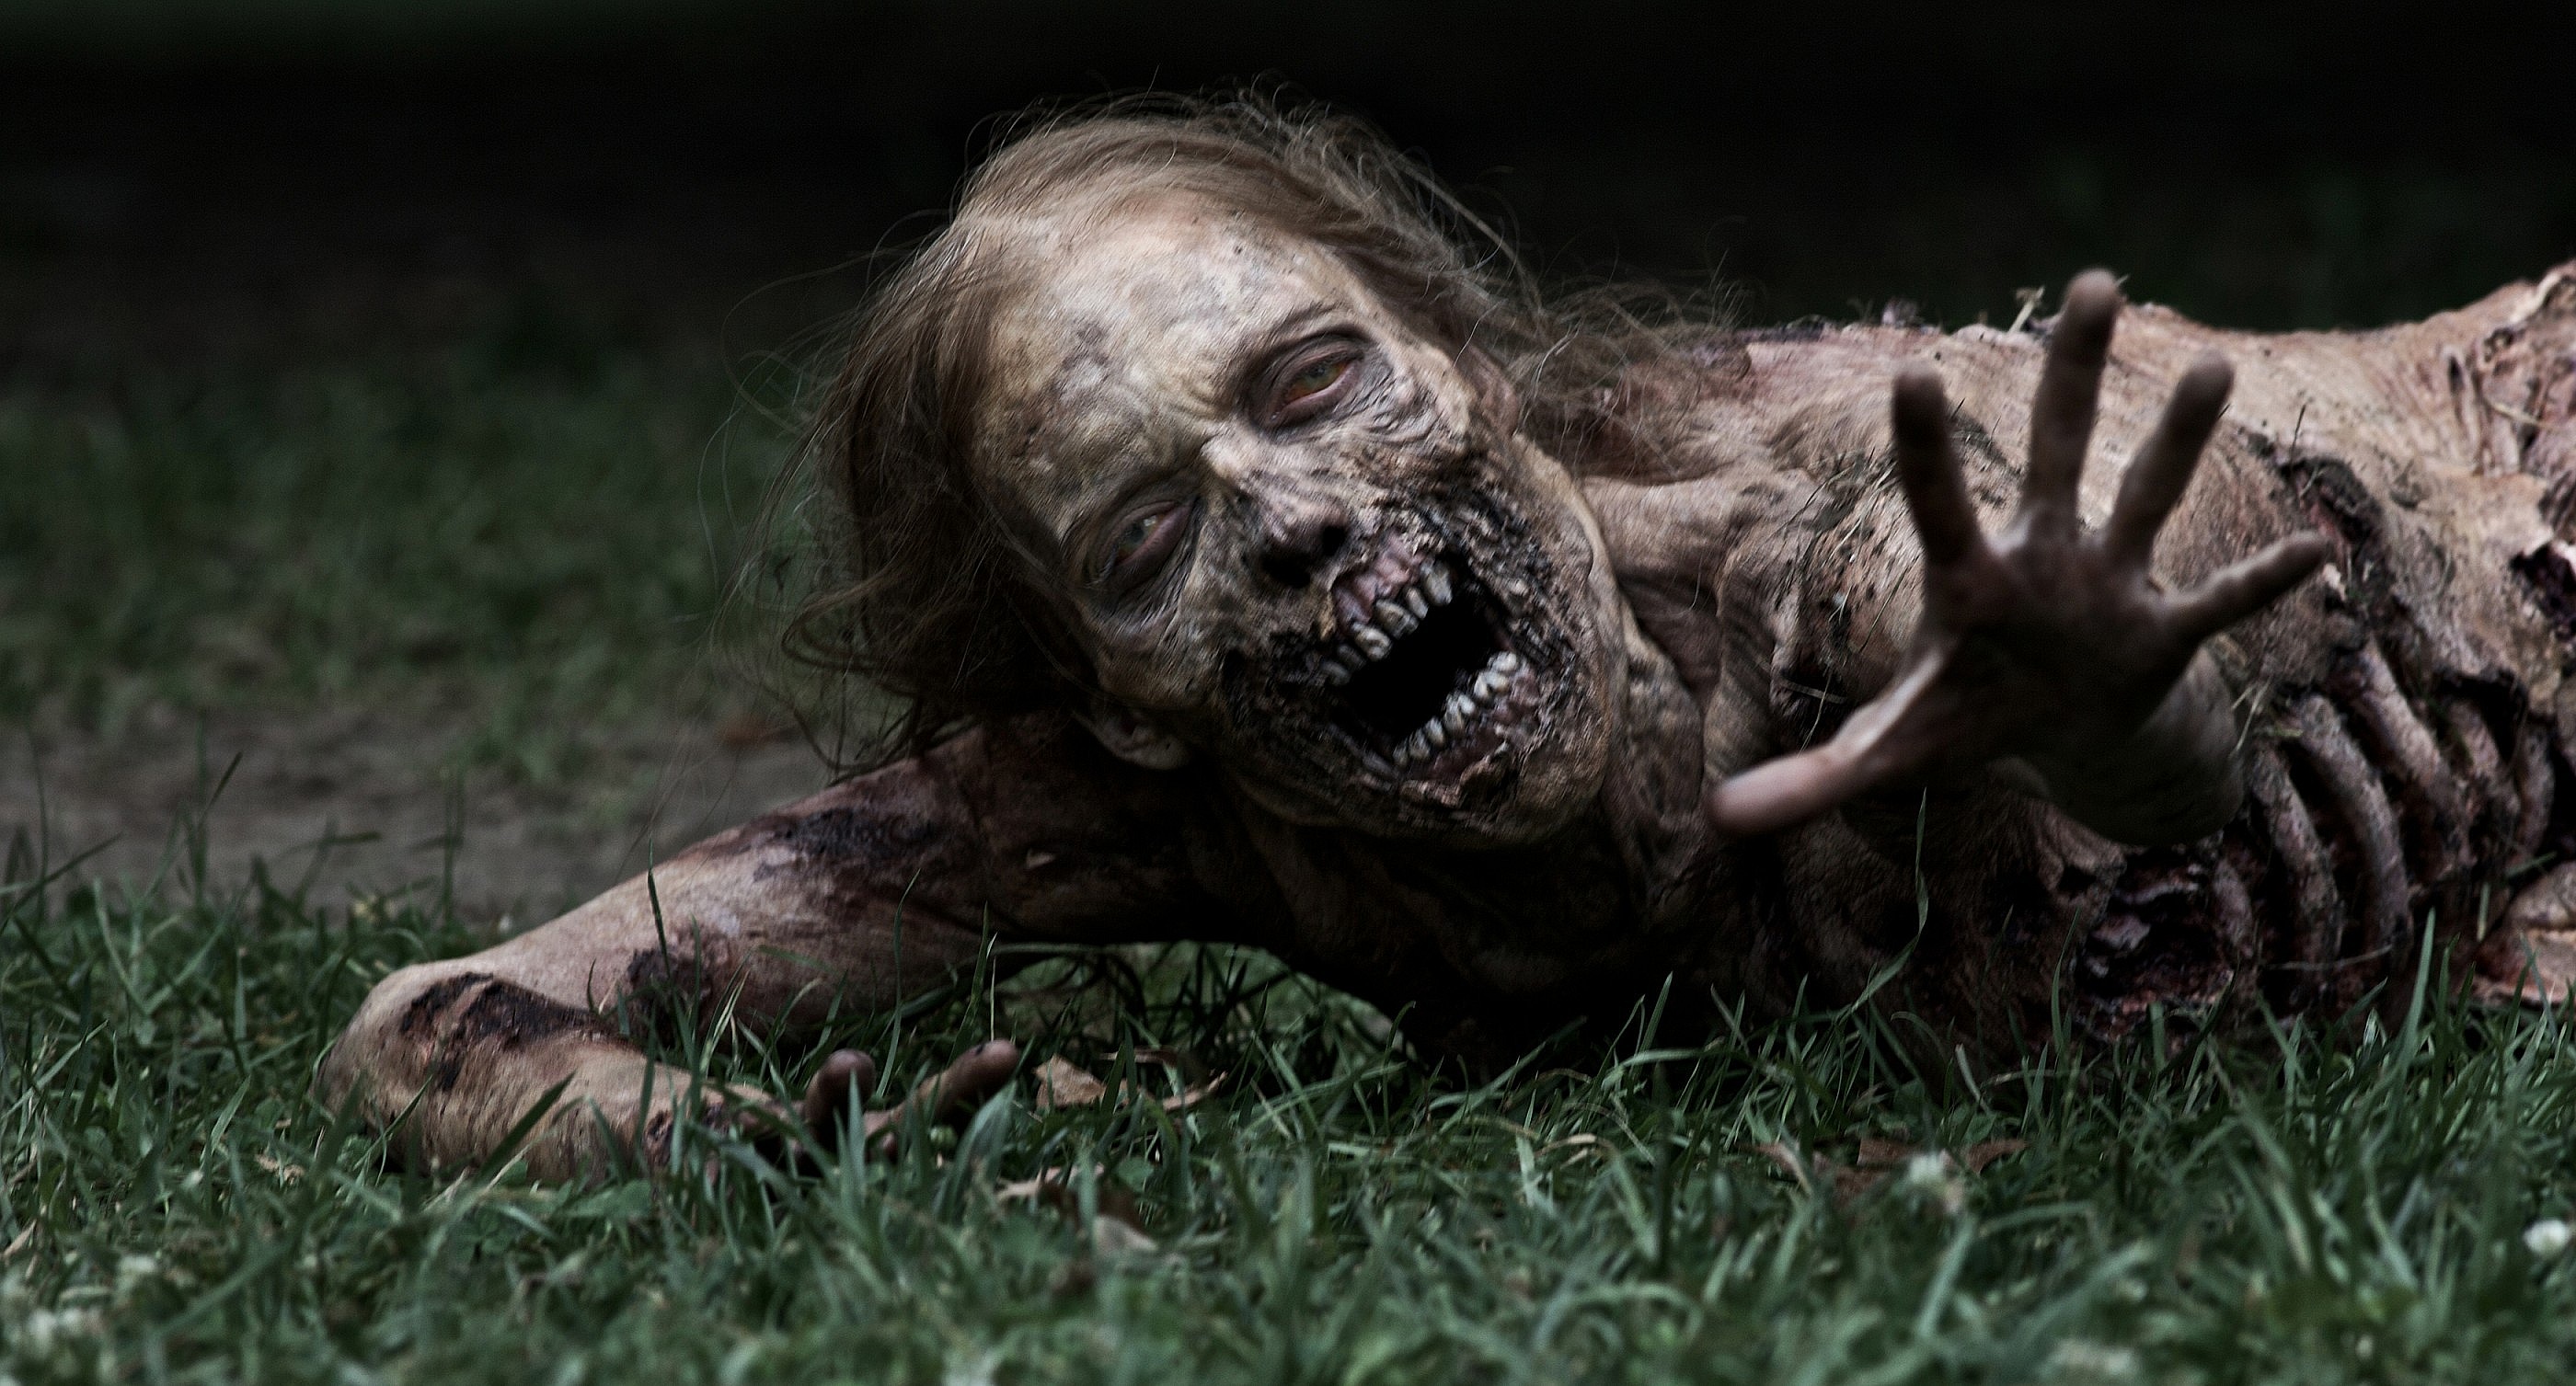 The “Science” of Zombies and the Walking Dead, with Robert ...